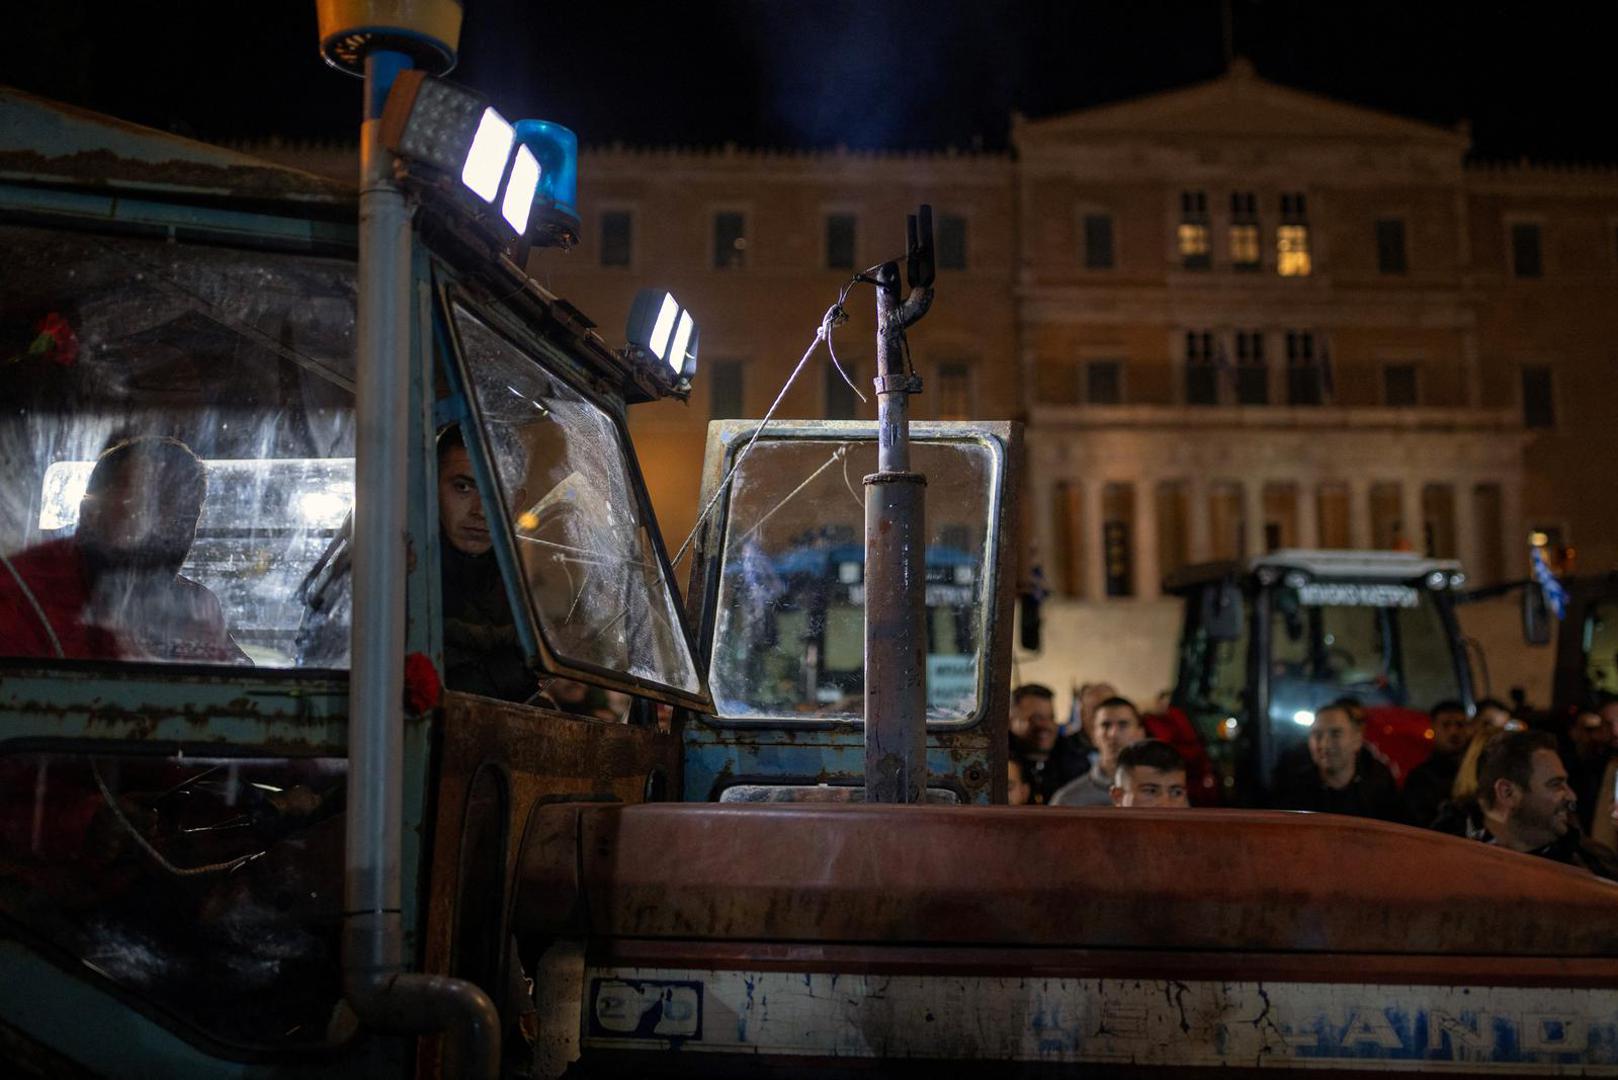 Greek farmers on a tractor take part in a protest over rising energy costs and competition from imports, in front of the parliament building in Athens, Greece, February 20, 2024. REUTERS/Alkis Konstantinidis Photo: Alkis Konstantinidis/REUTERS